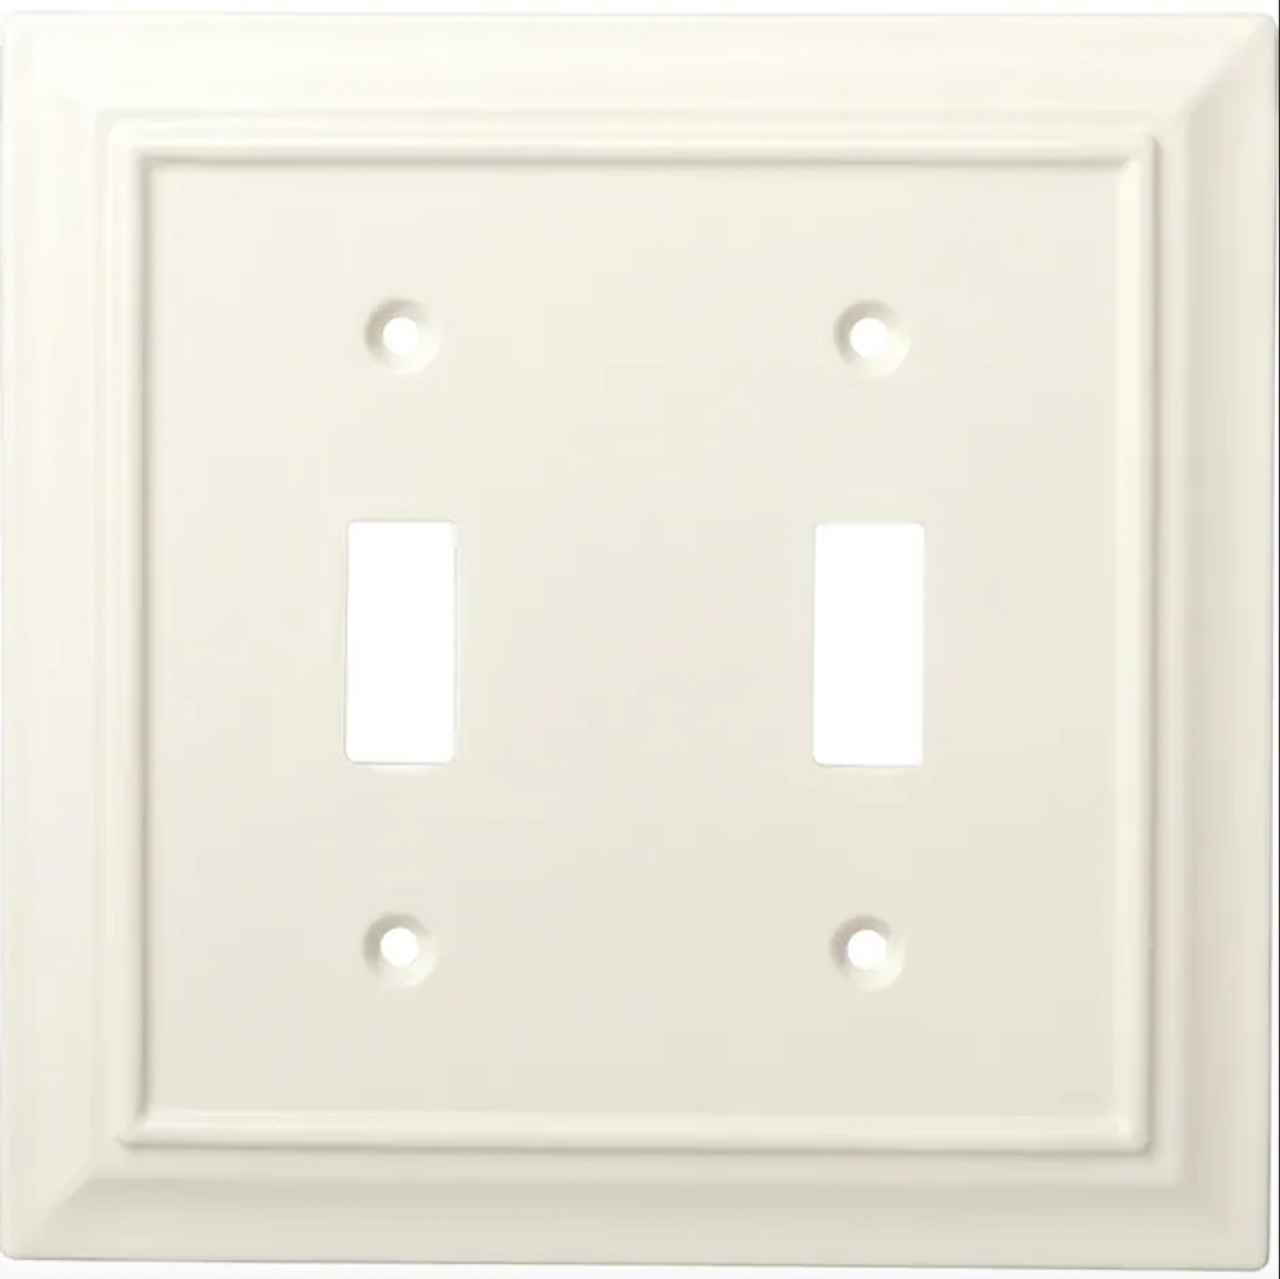 Brainerd W31561-LAL Light Almond Classic Architect Double Switch Wall Plate Cover